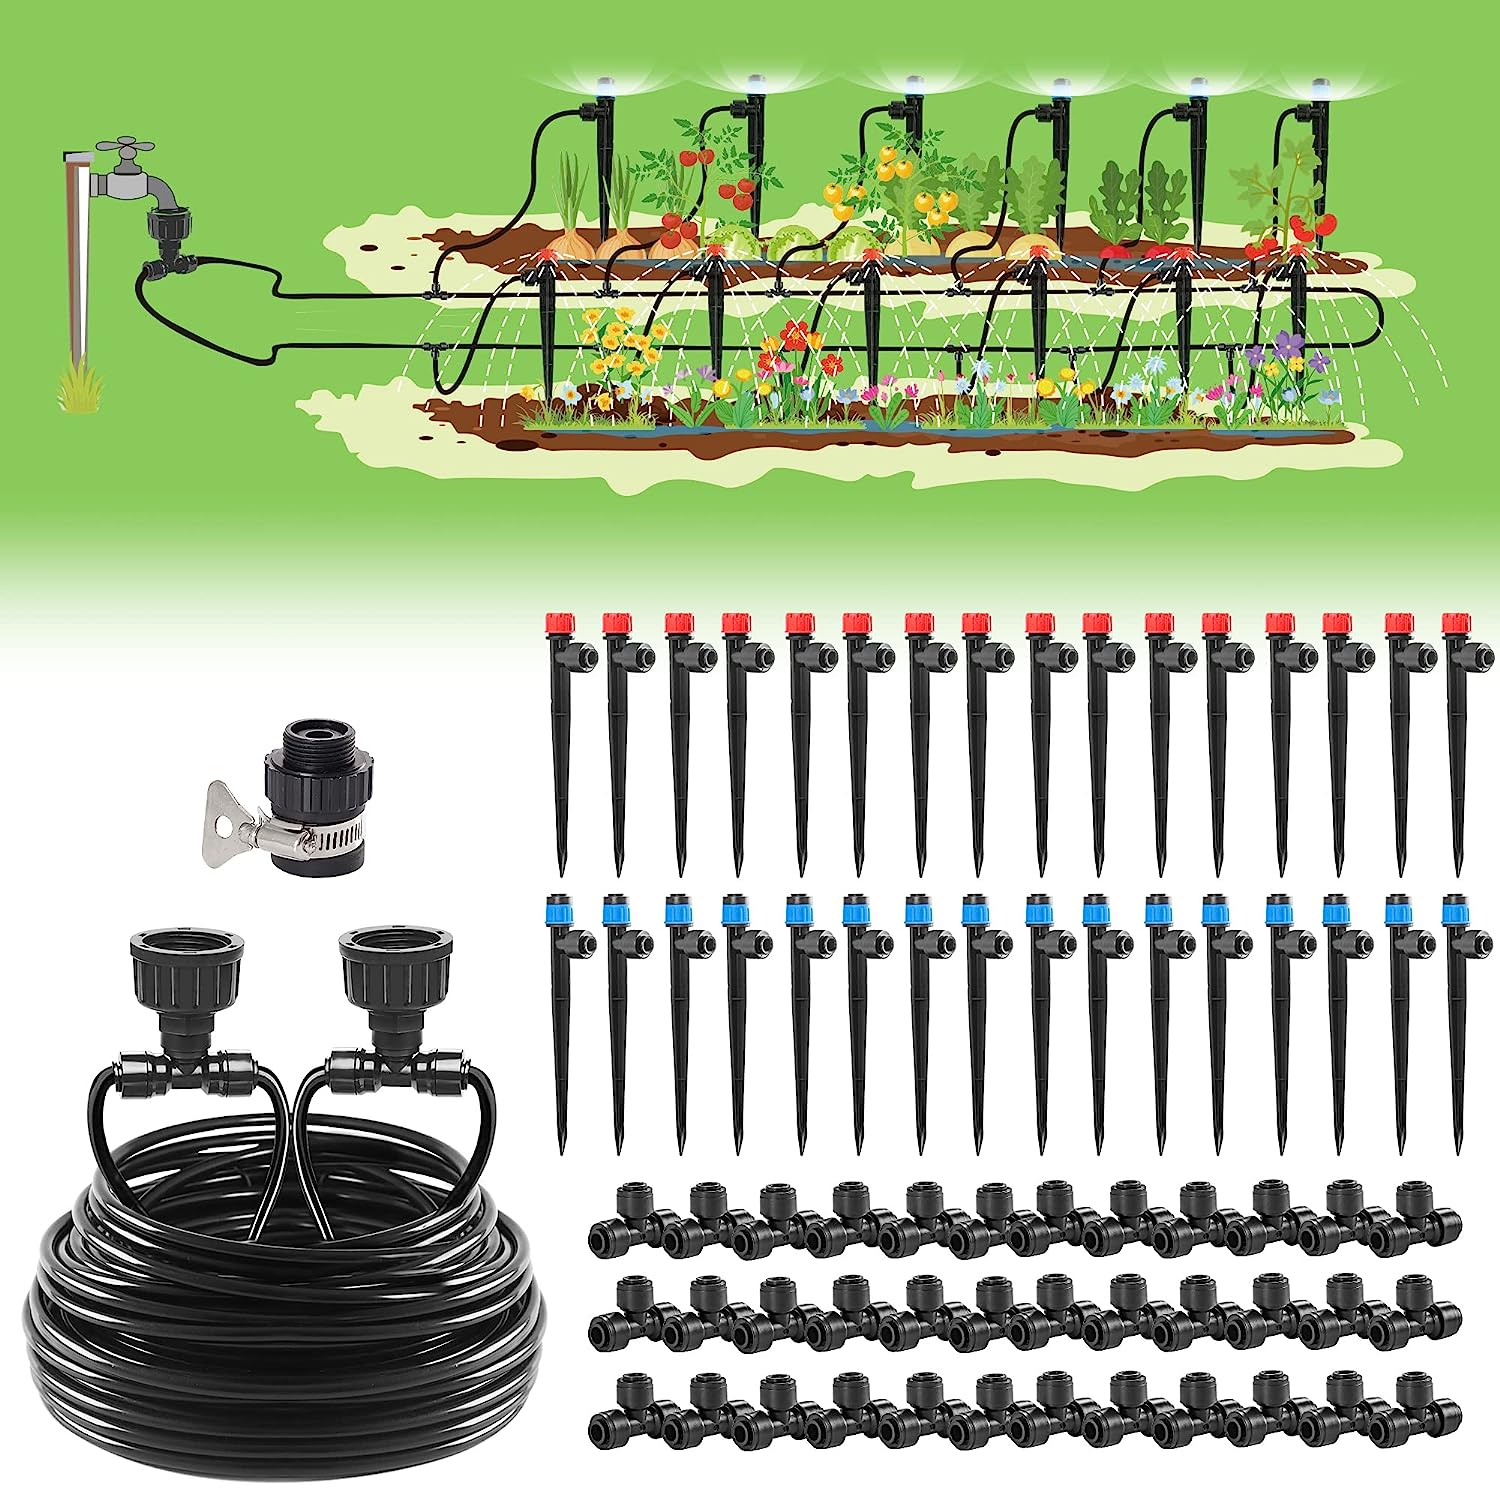 MIXC New Quick-Connect Drip Irrigation Kit, 100FT [...]